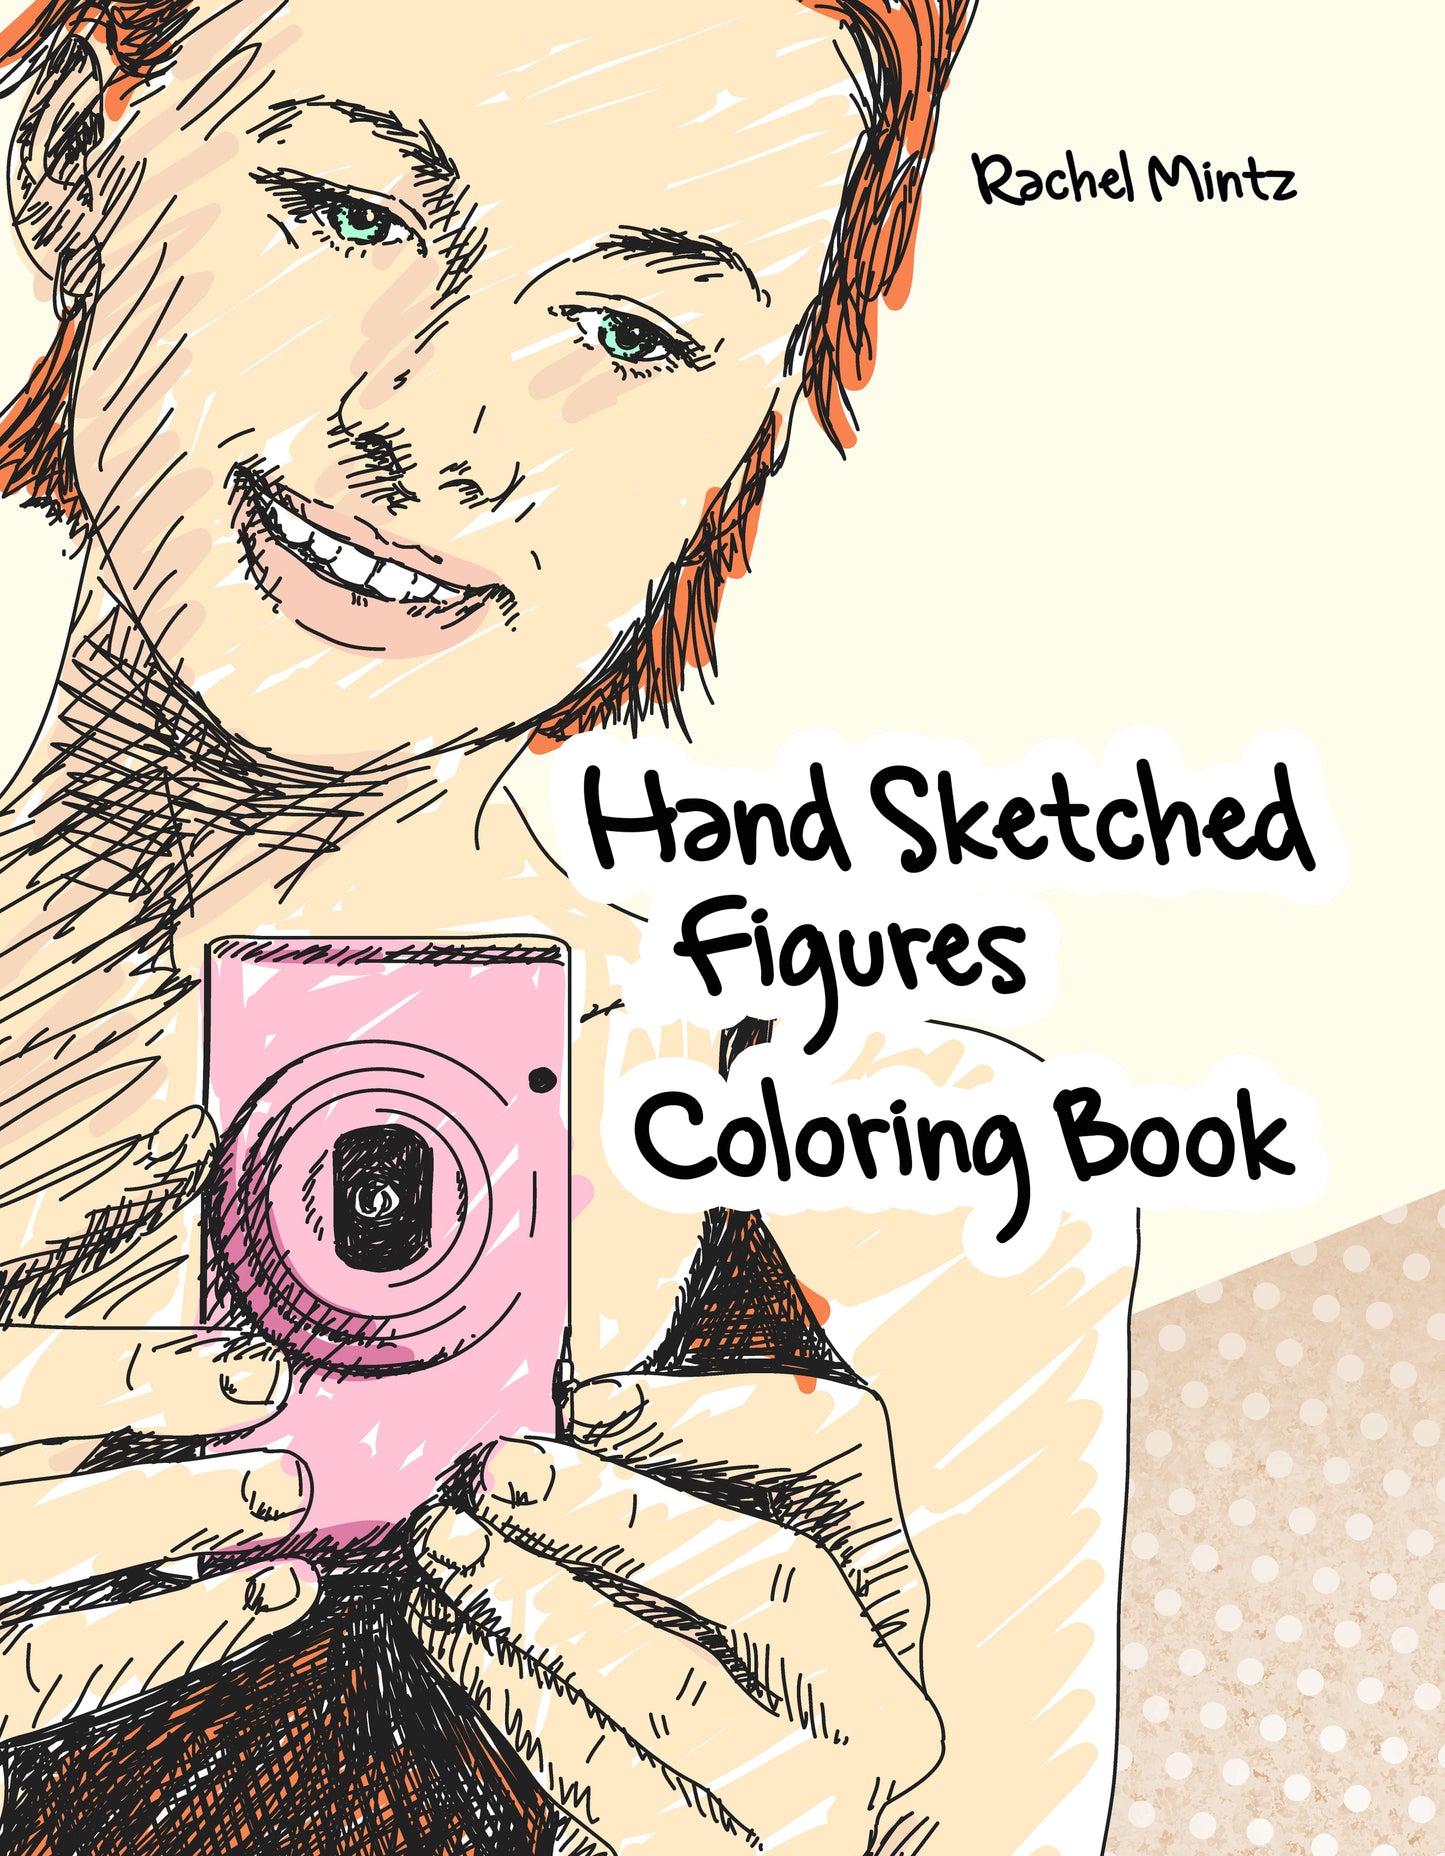 Hand Sketched Figures - Casual Scenes Art To Color (PDF Book)